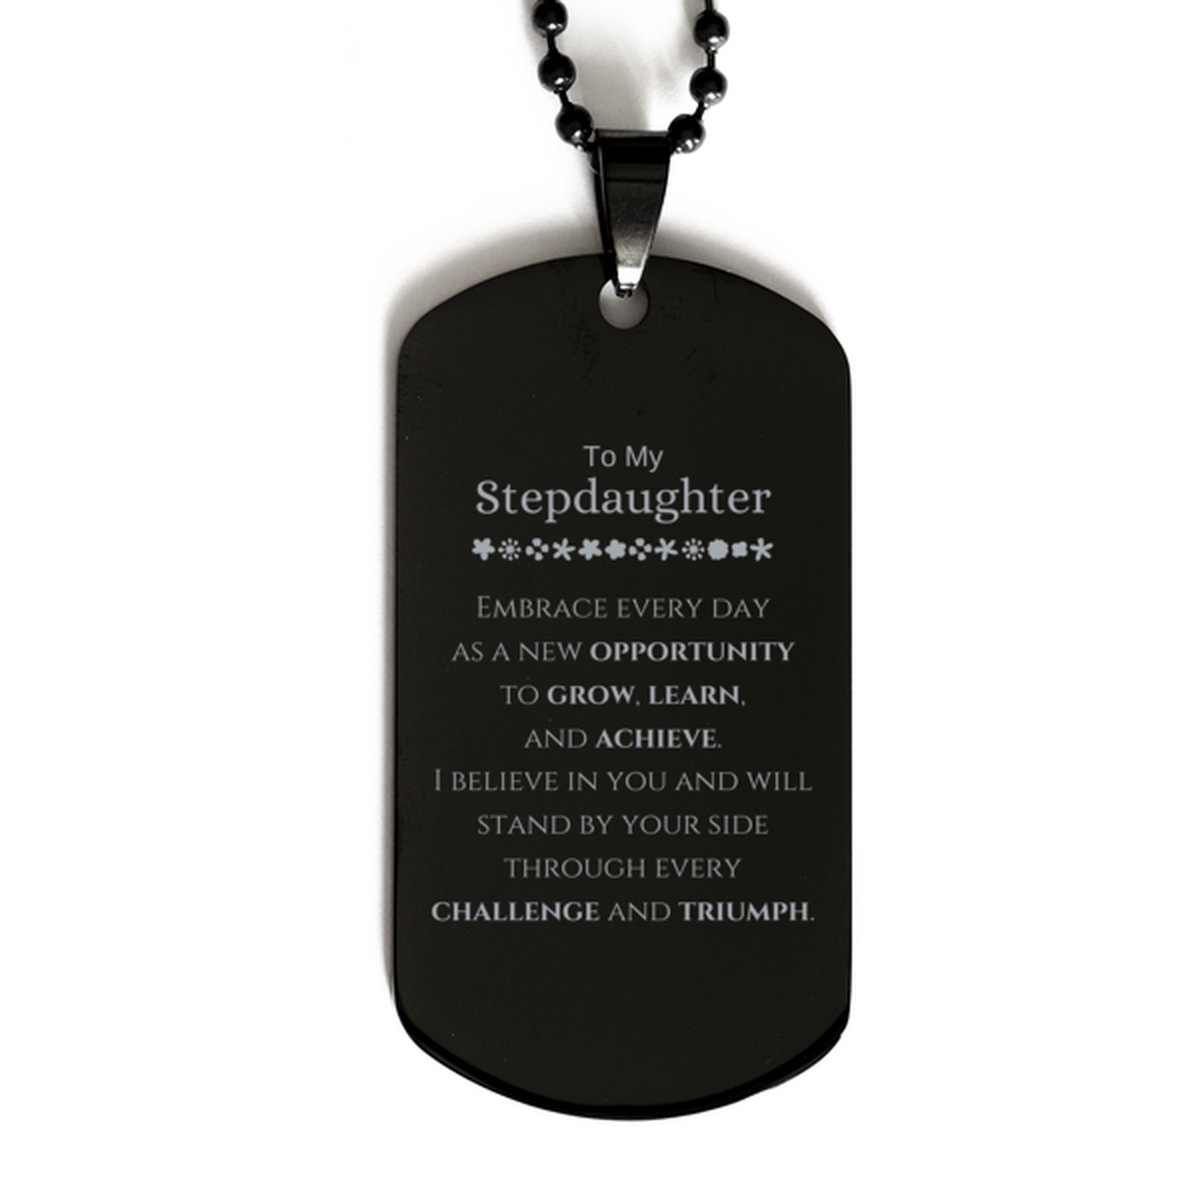 To My Stepdaughter Gifts, I believe in you and will stand by your side, Inspirational Black Dog Tag For Stepdaughter, Birthday Christmas Motivational Stepdaughter Gifts